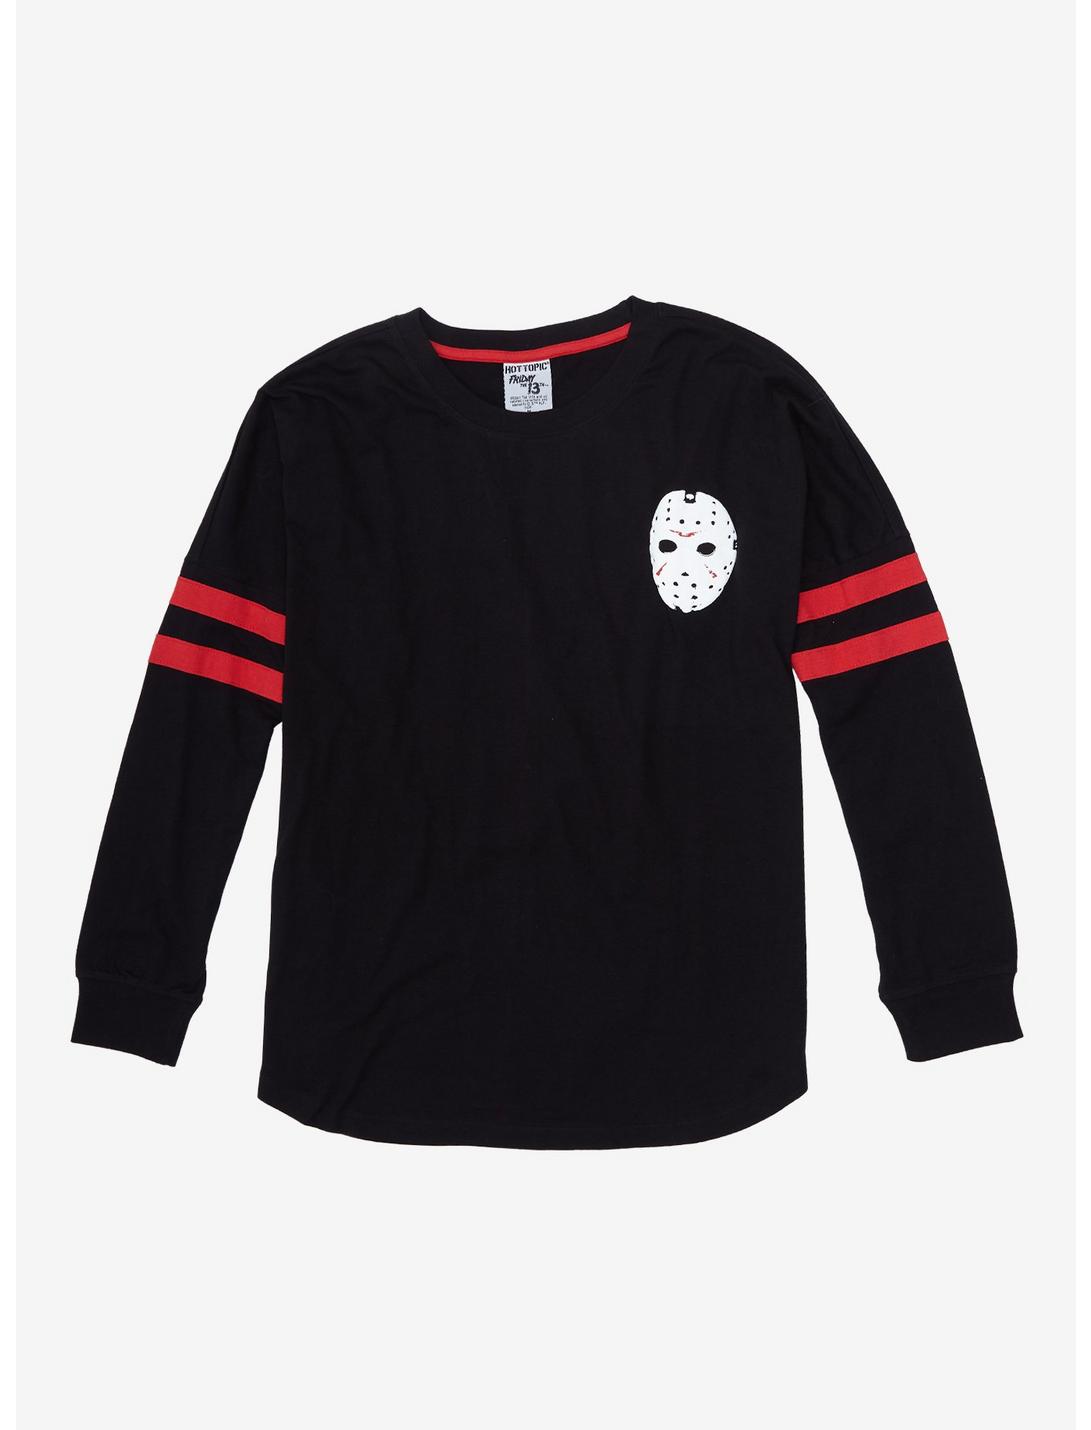 Friday The 13th Jason Mask Girls Athletic Jersey Plus Size, MULTI, hi-res